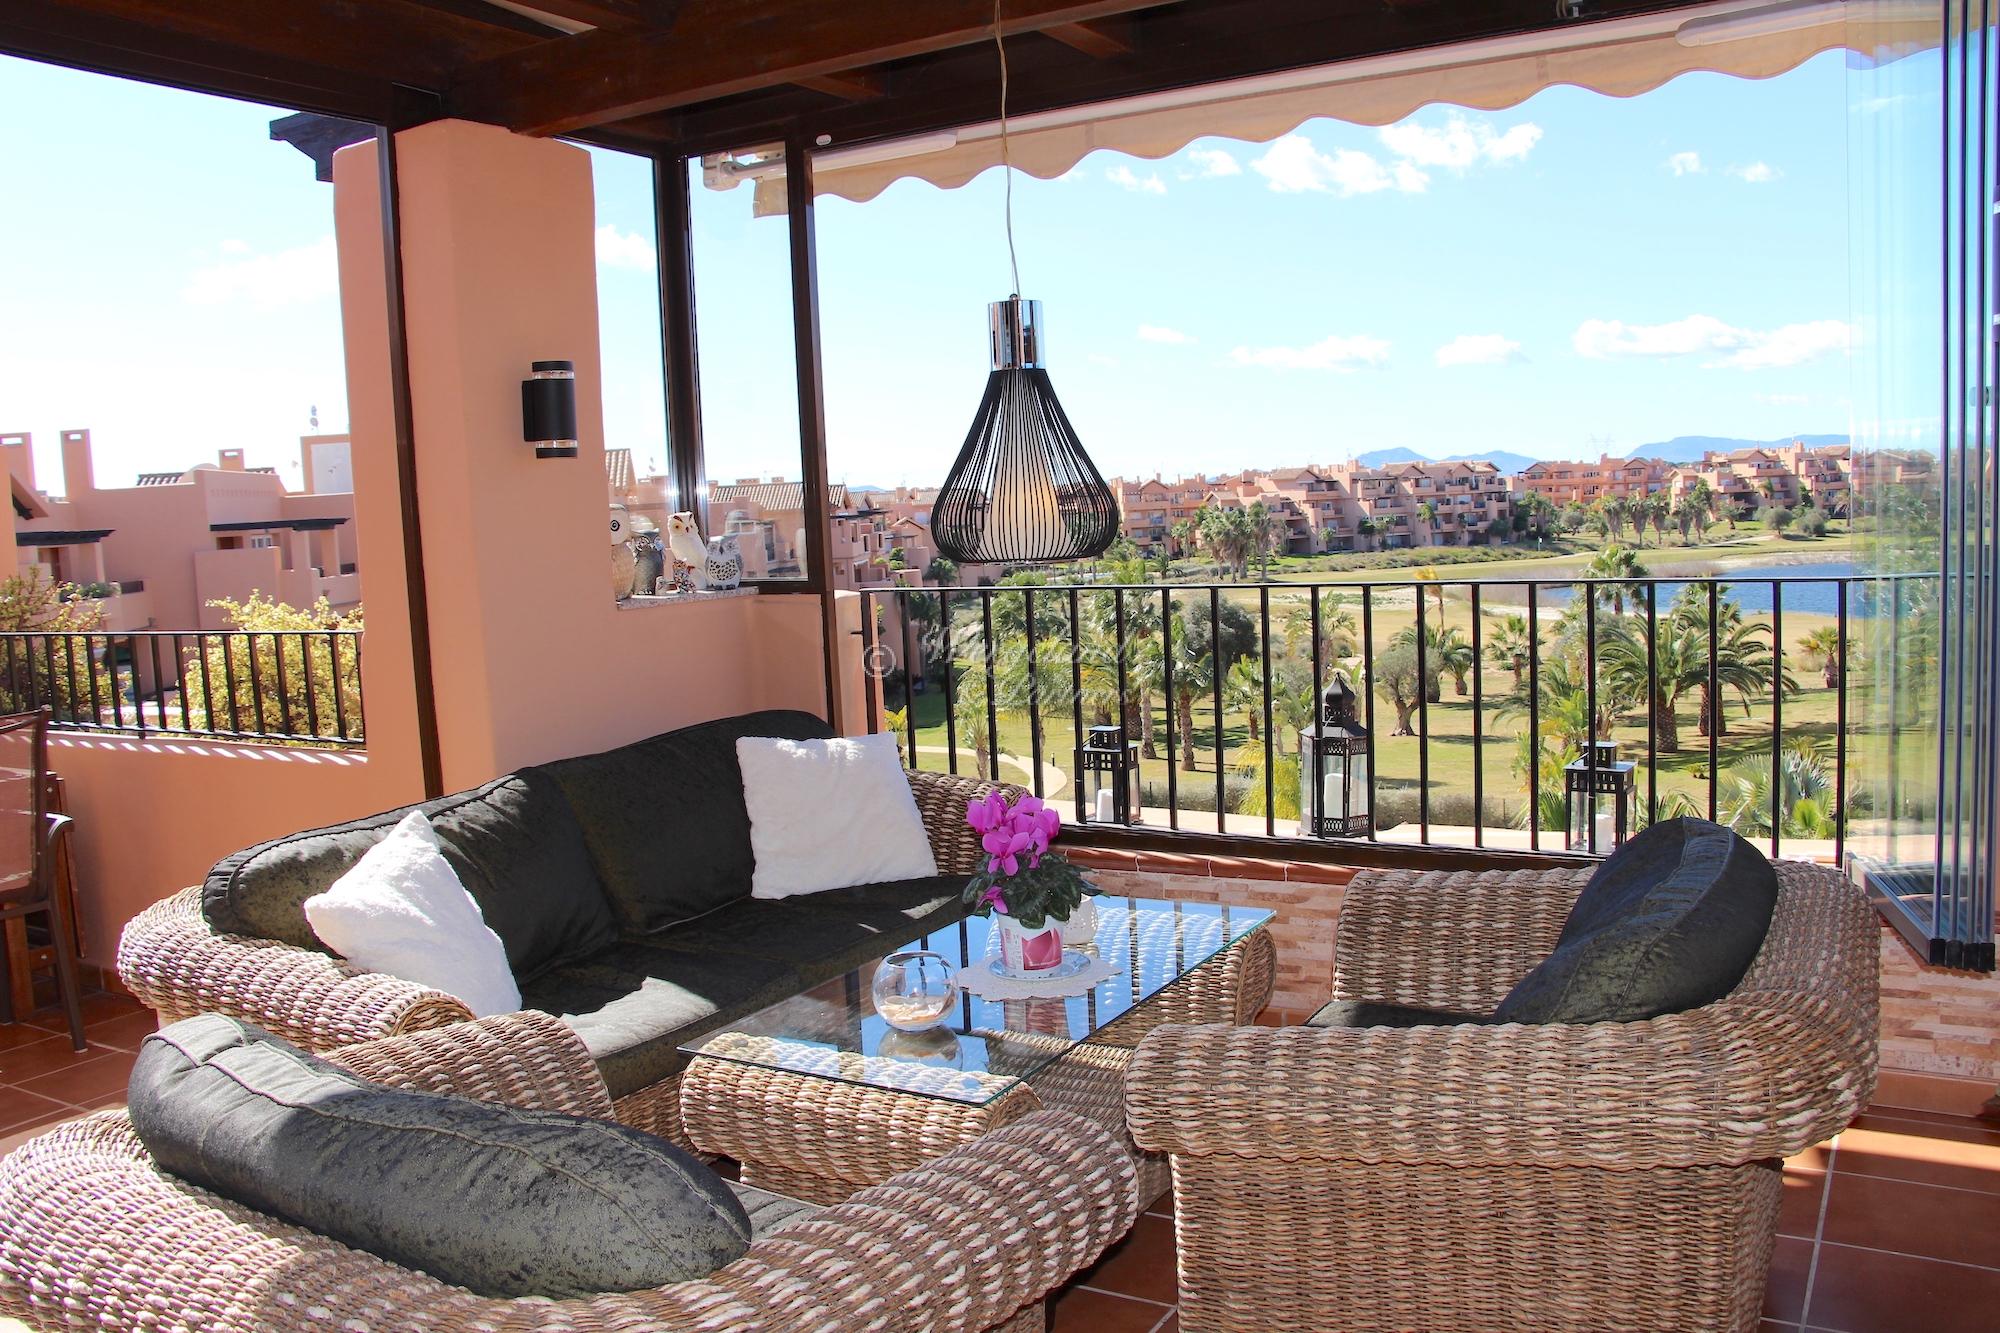 2 Bedroom furnished Penthouse with 70 m2 large terraces. 10 years golf membership (family) on 6 courses included [8131]